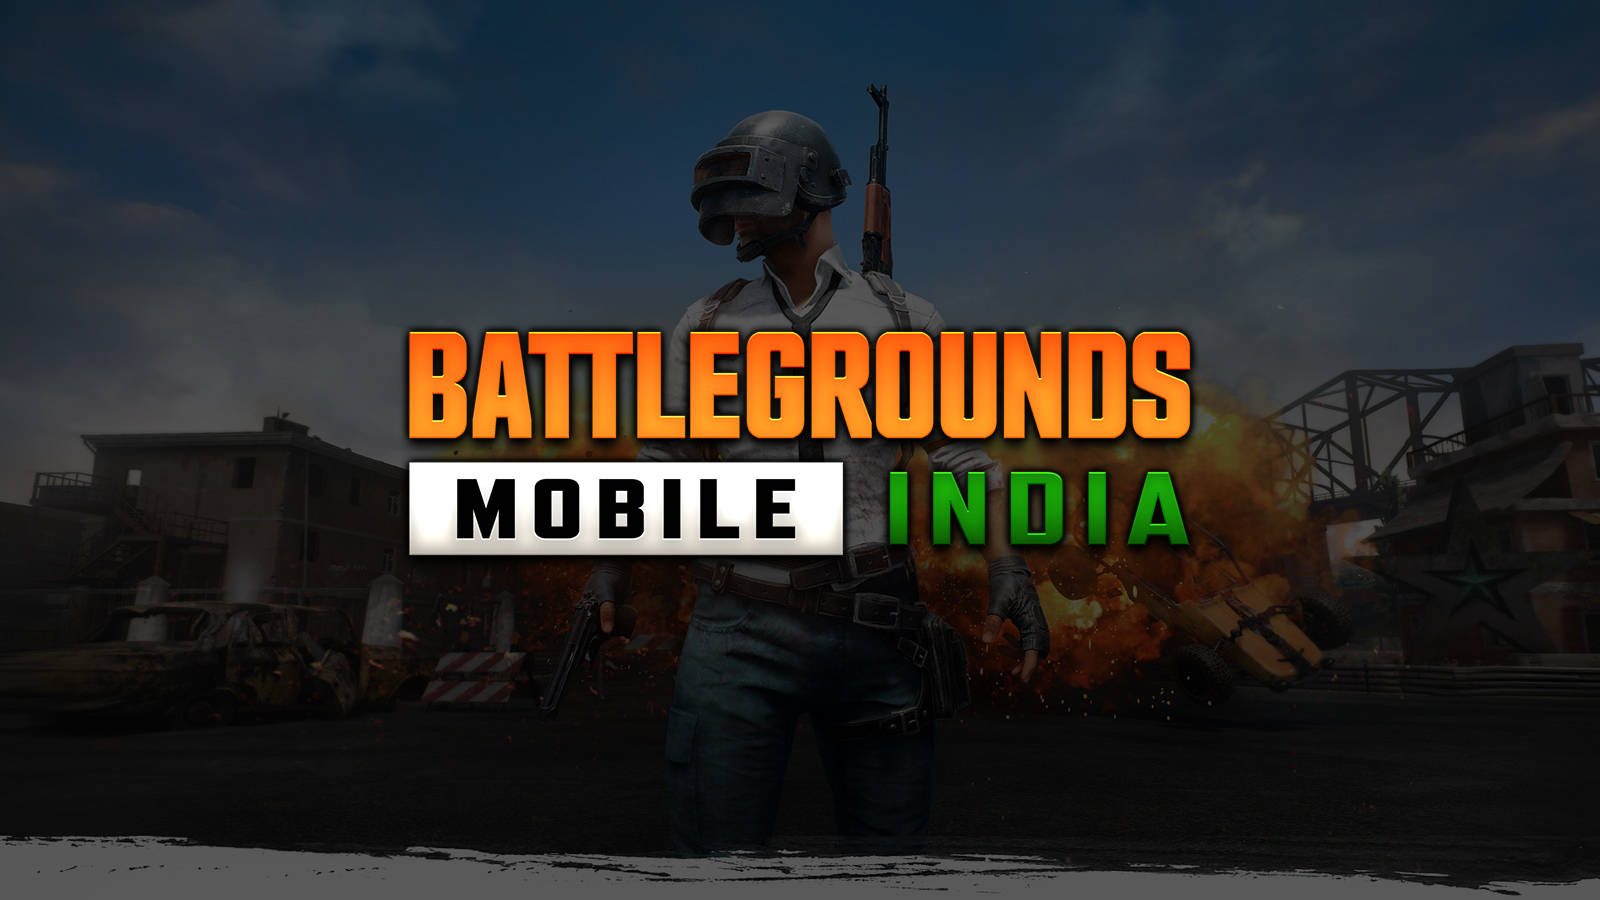 Battleground India Colourful Mobile Game Title Background